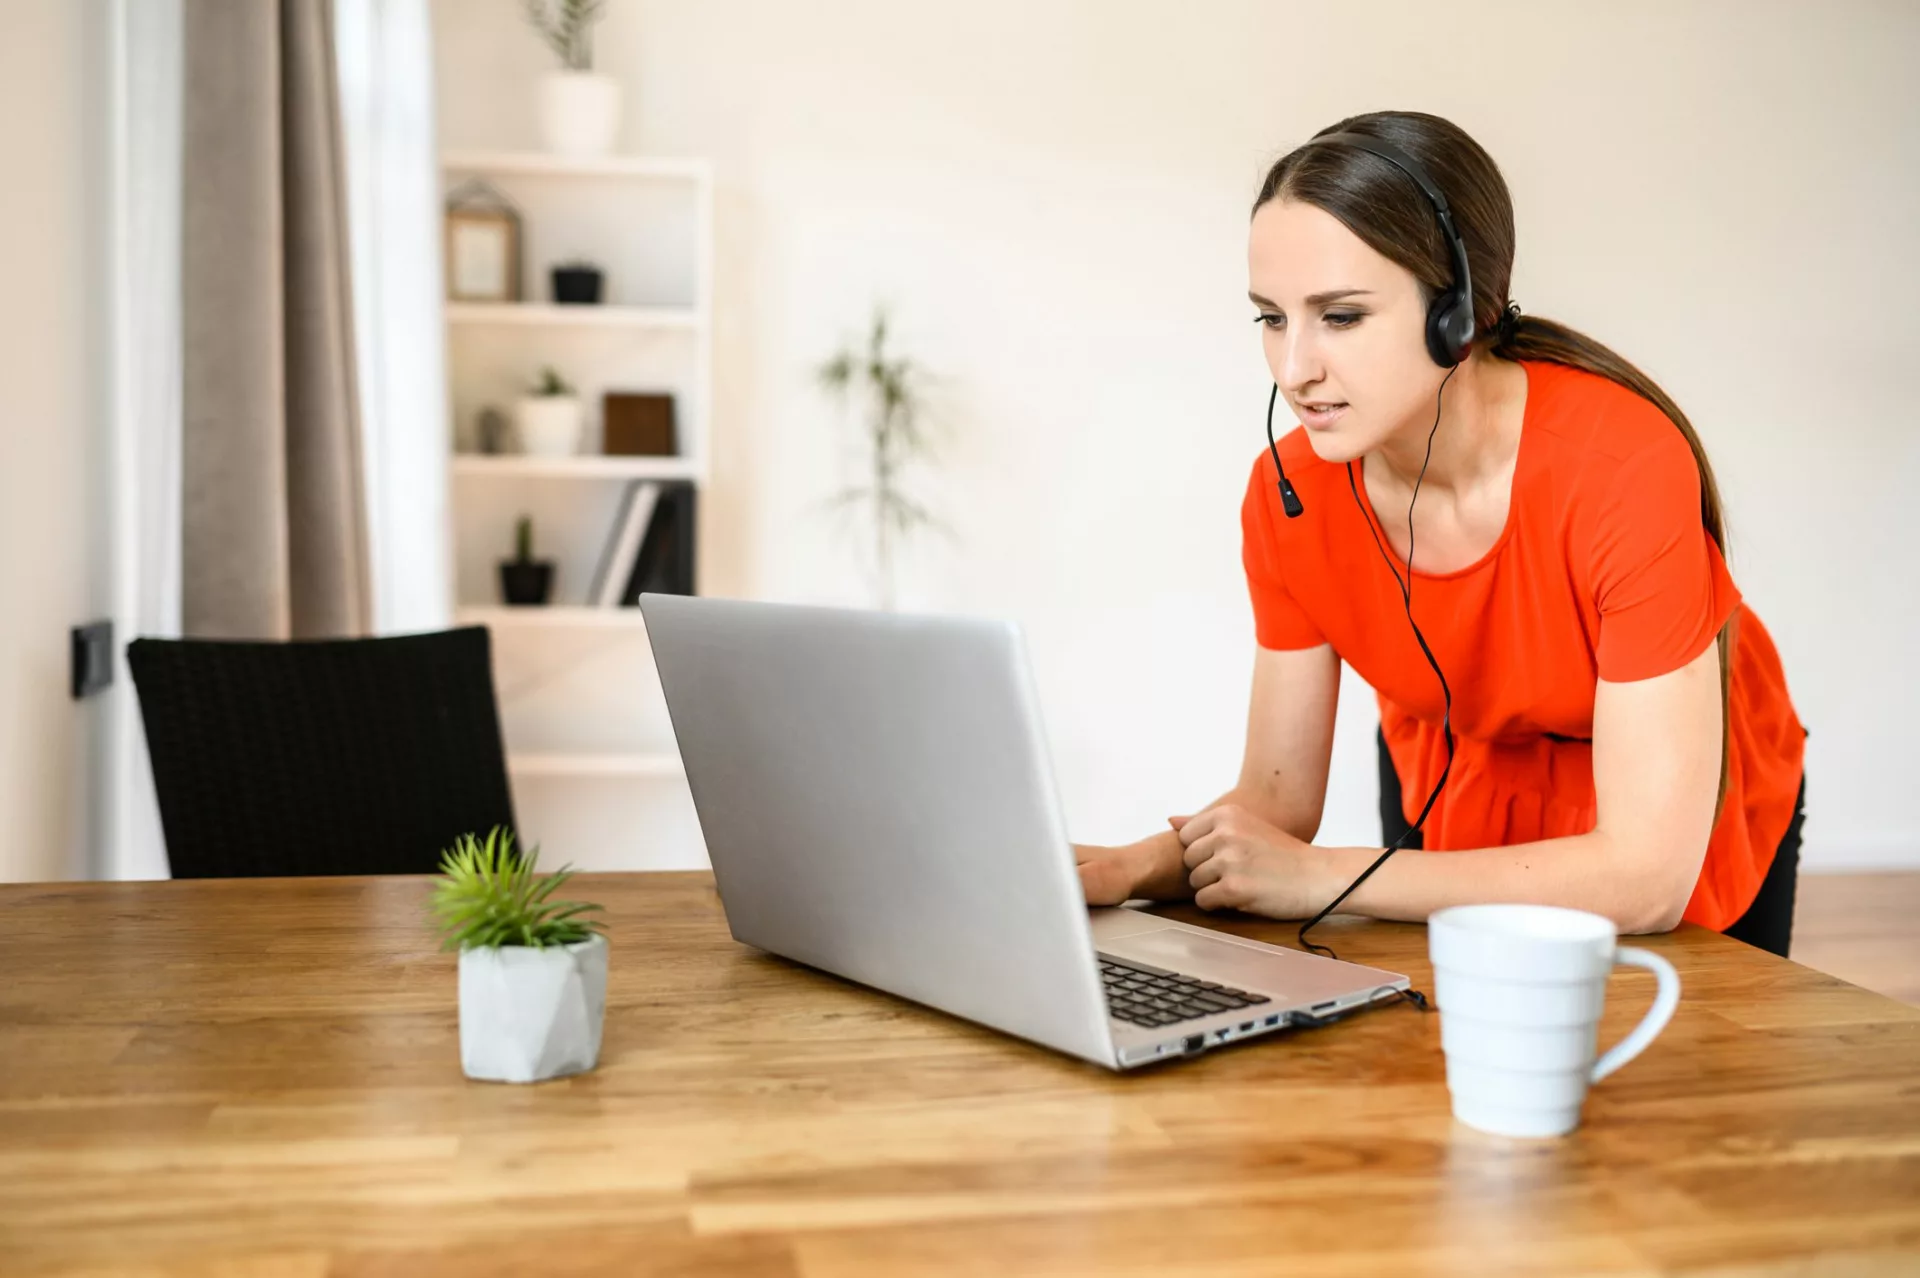 customer service agent stands at table while working remotely